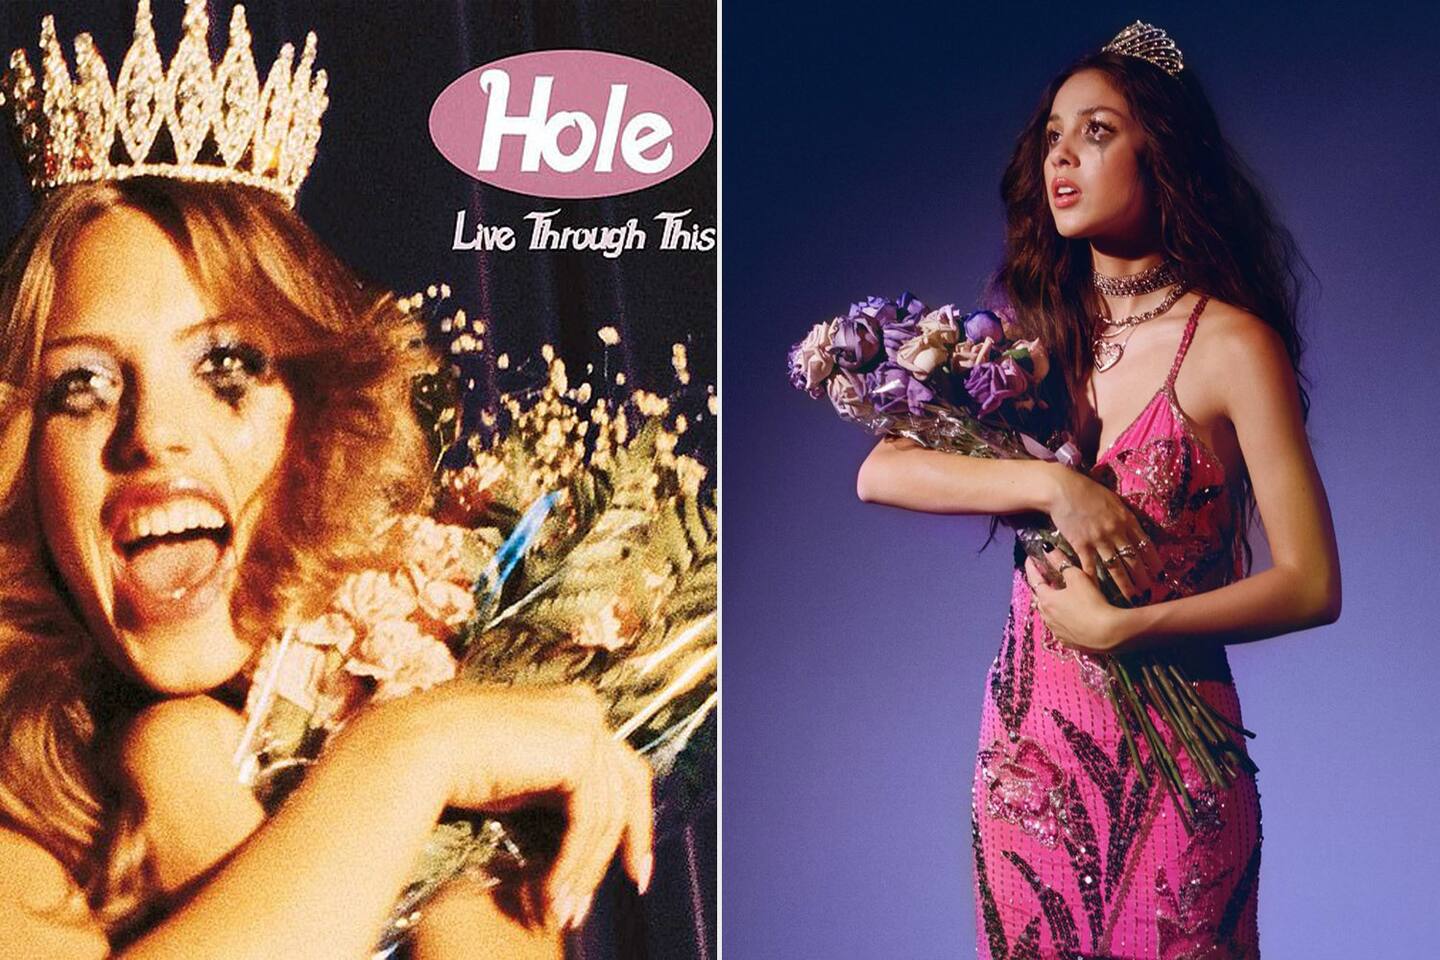 Courtney Love has blasted Olivia Rodrigo for copying the album art from the 1994 Hole album, Live Through This, in promotional imagery for her movie Sour Prom Concert Film. Photo/Geffen/Twitter